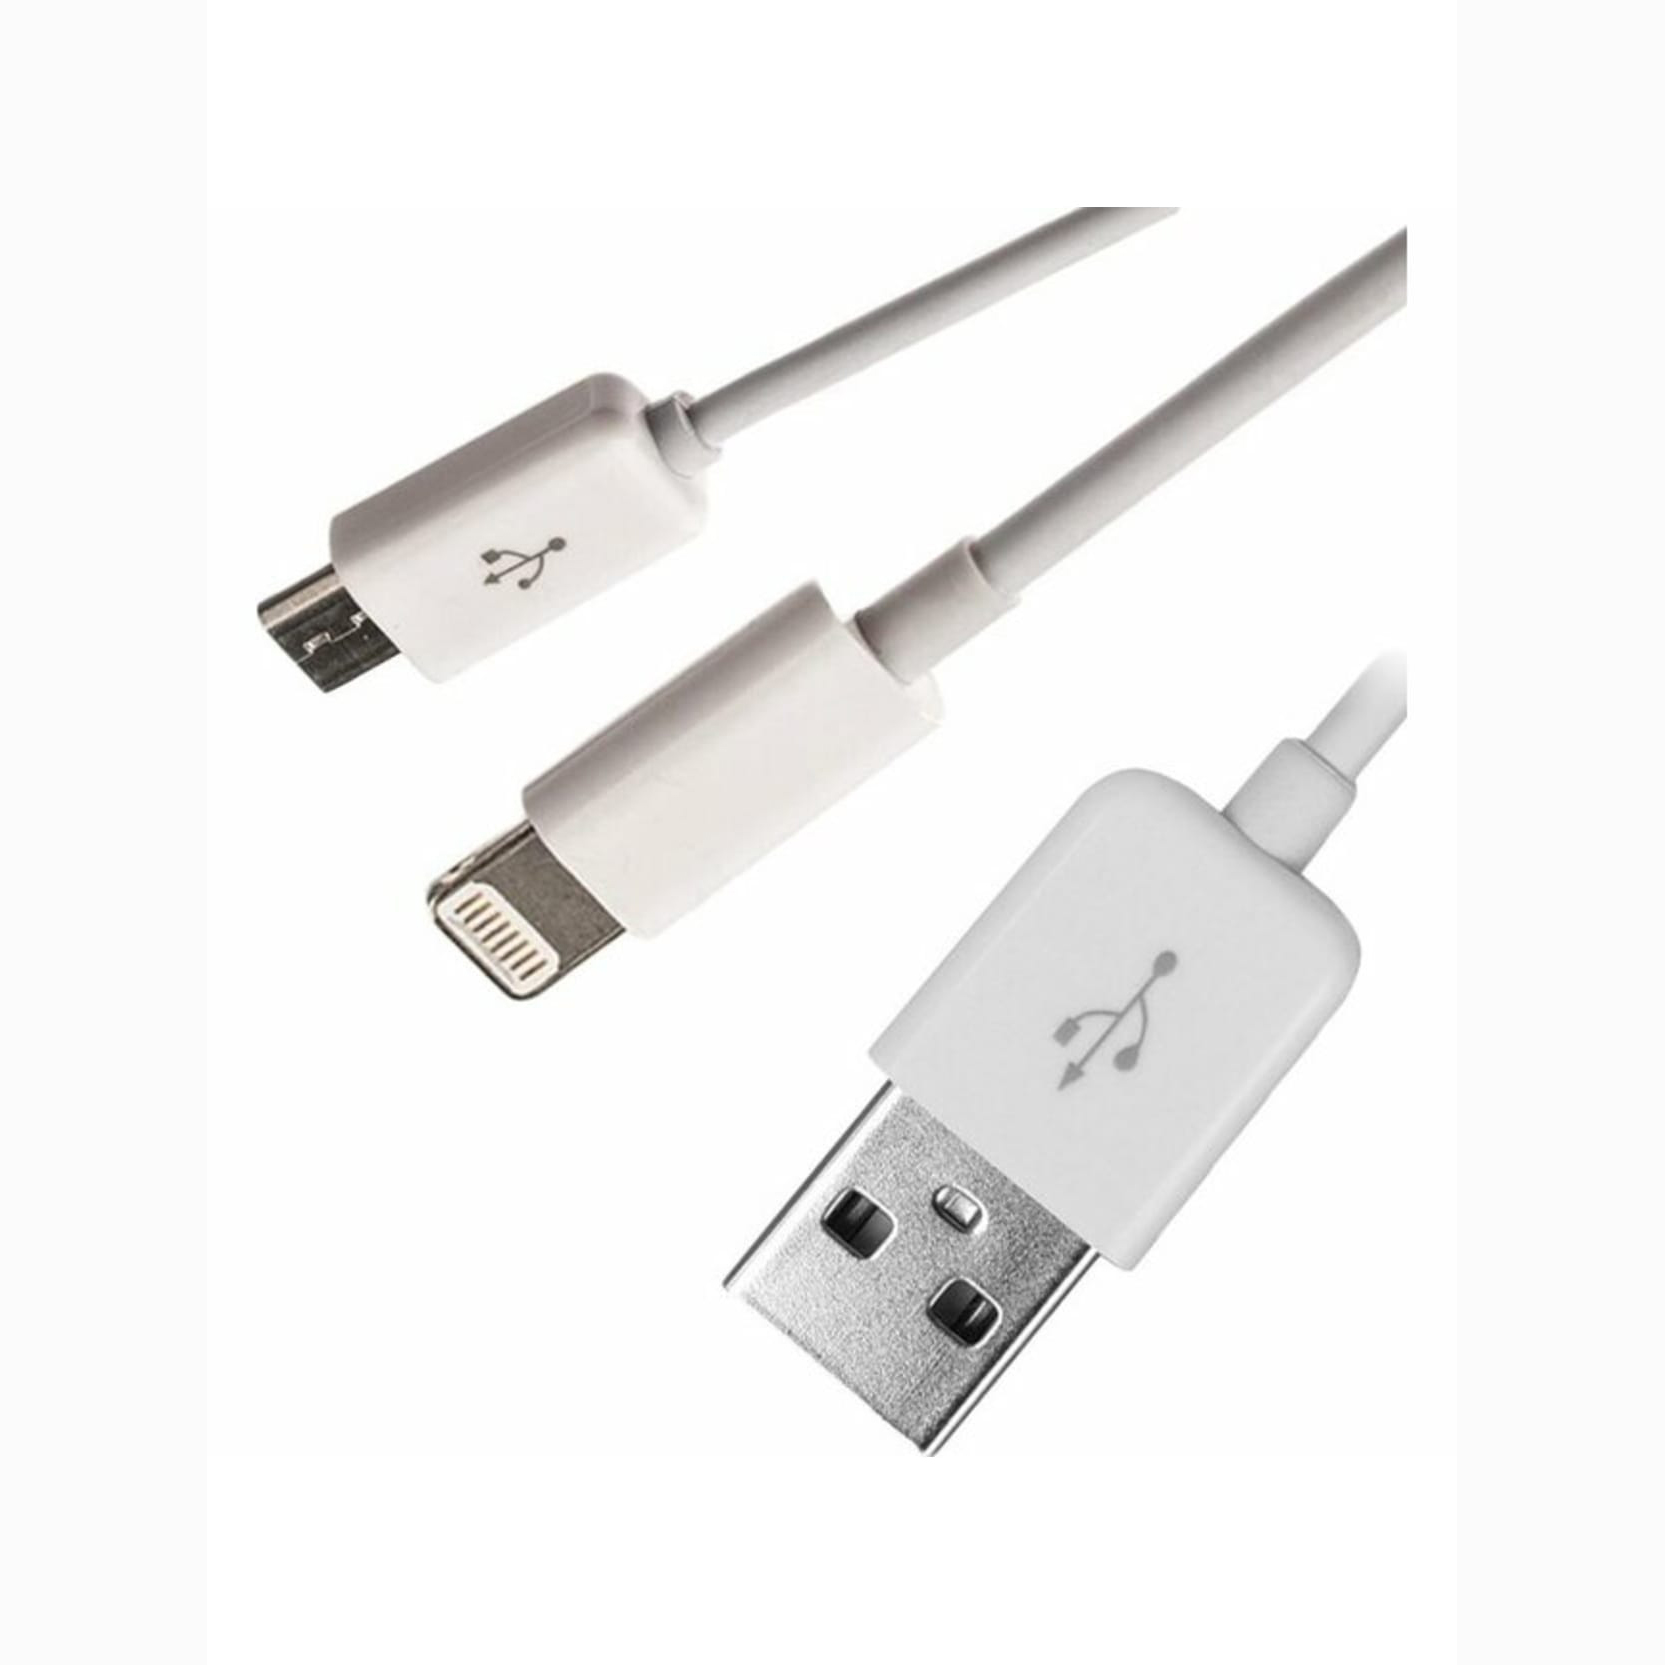 CABLE IPHONE& MICRO TO USB CHARGE FOR SMARTPHONE, Other Smartphone Acc